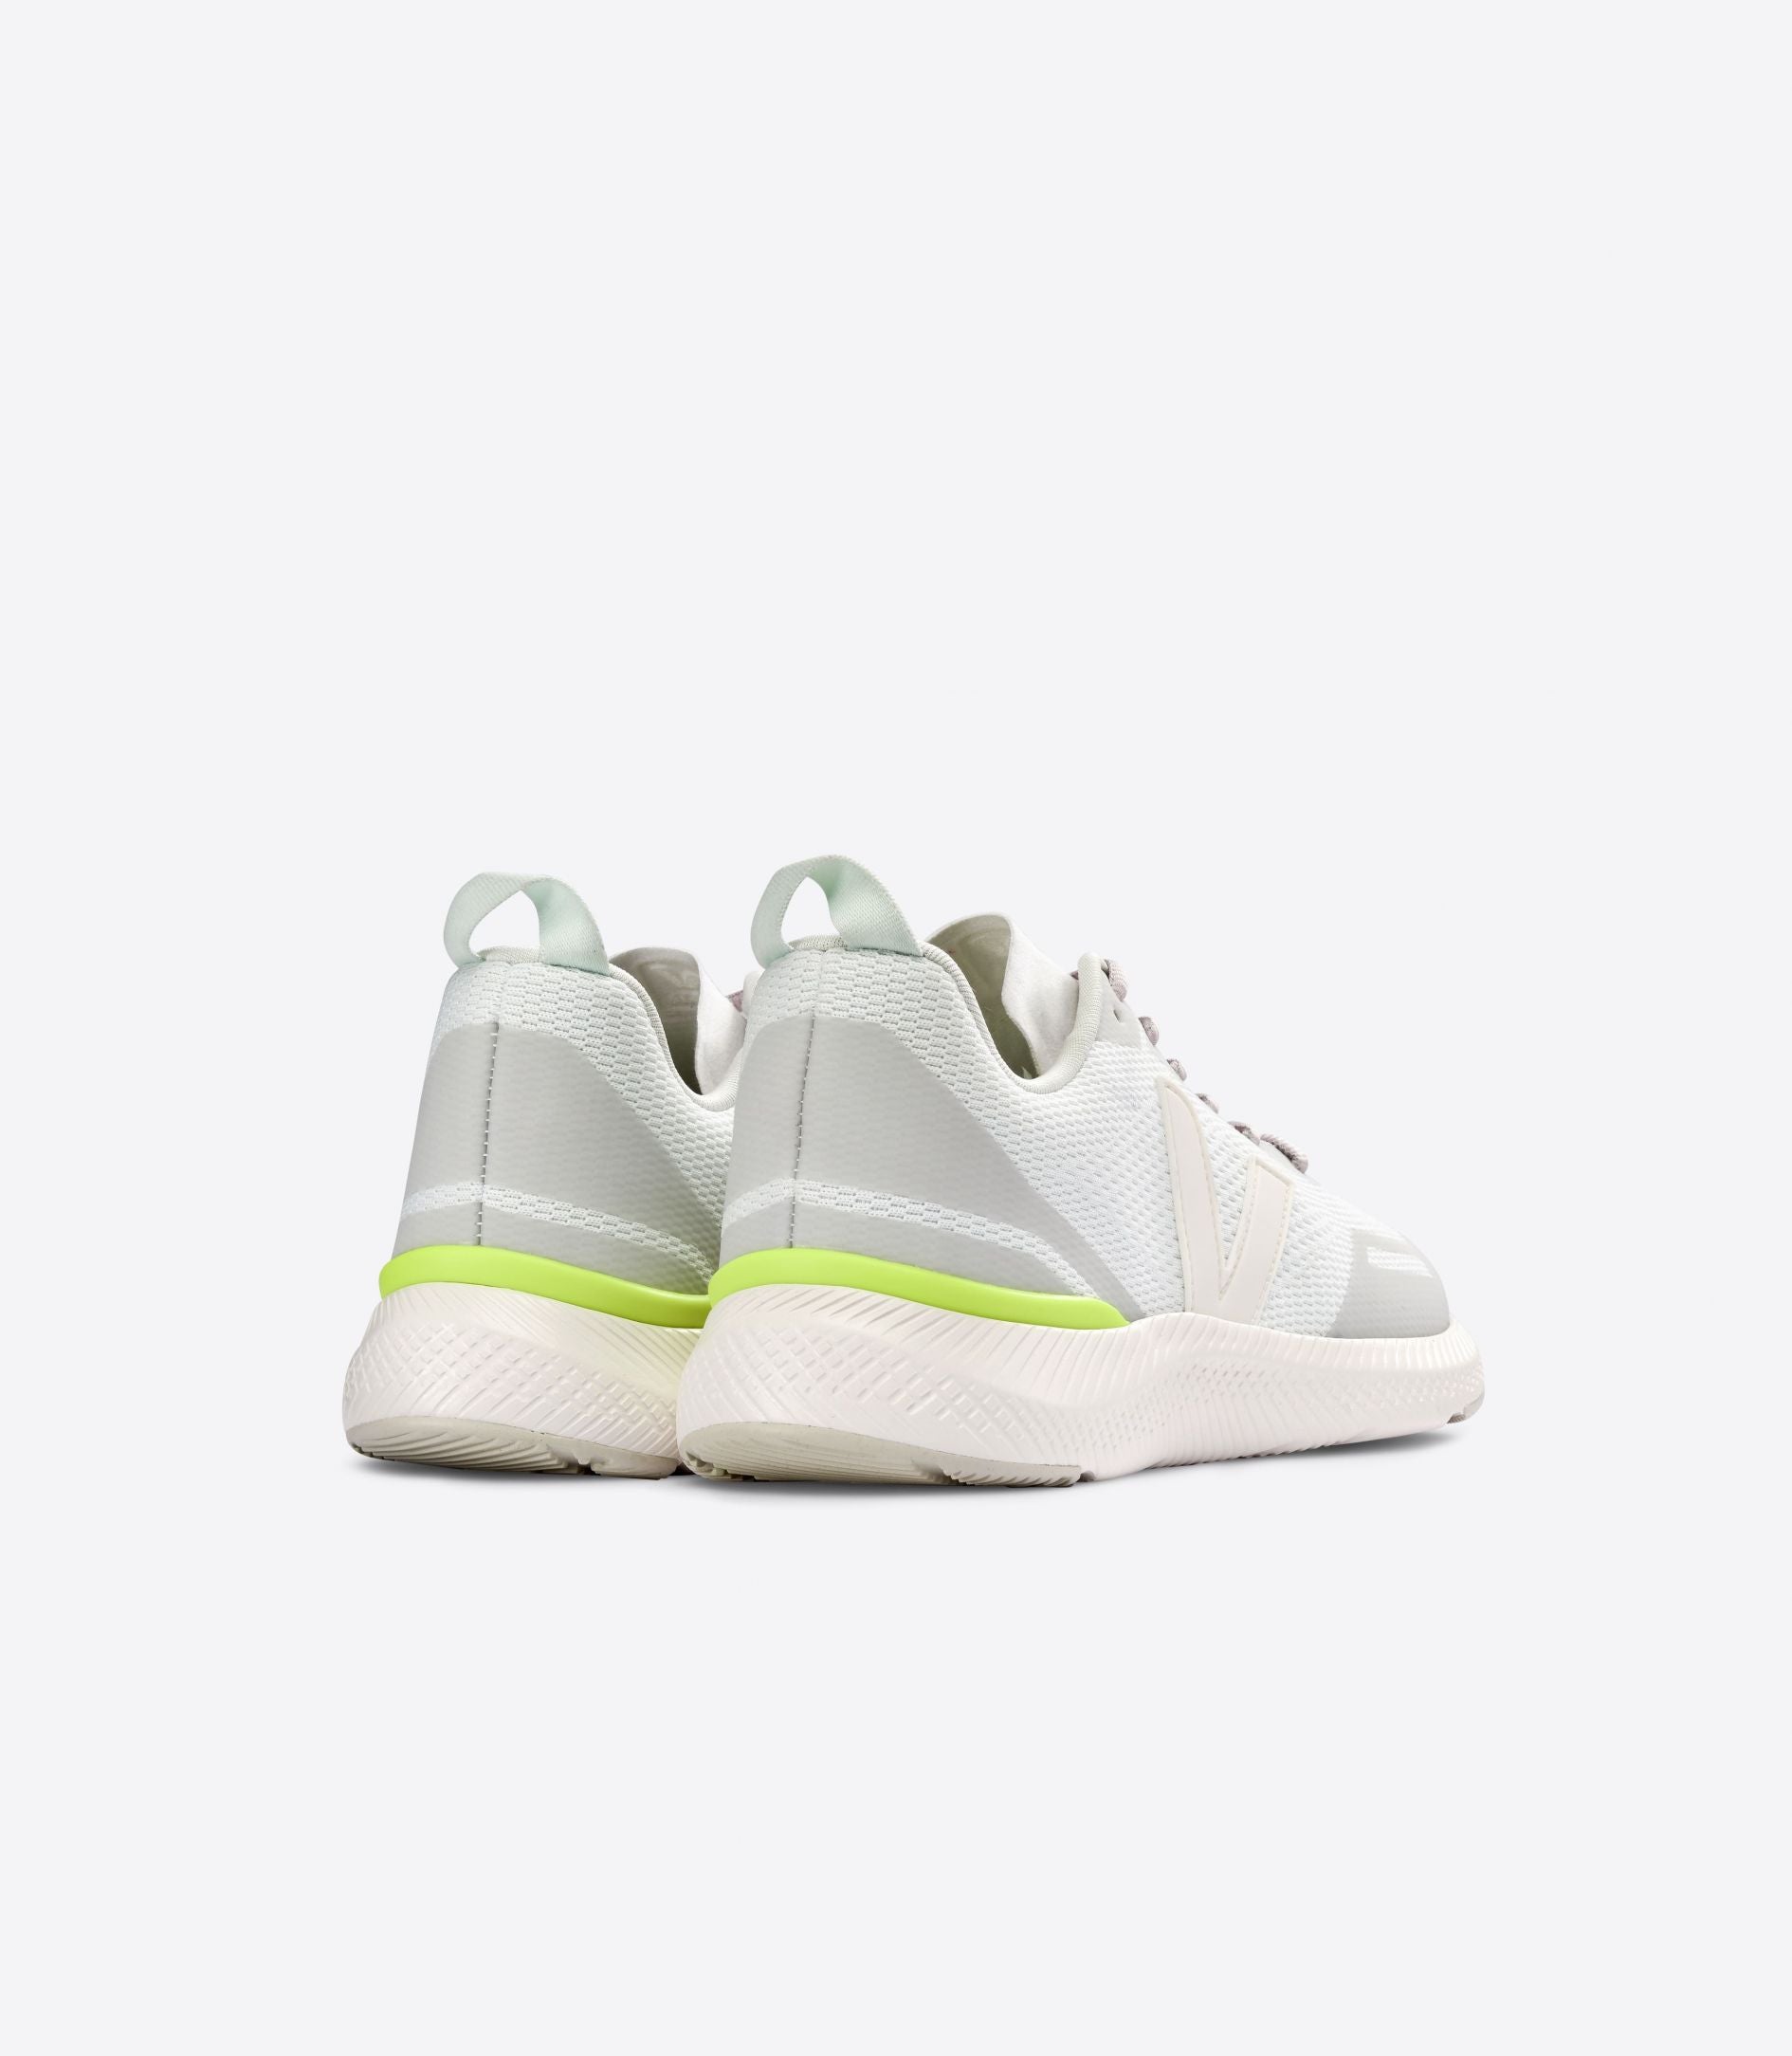 Back angle view of the Women's VEJA Impala in the color Frost/Cream